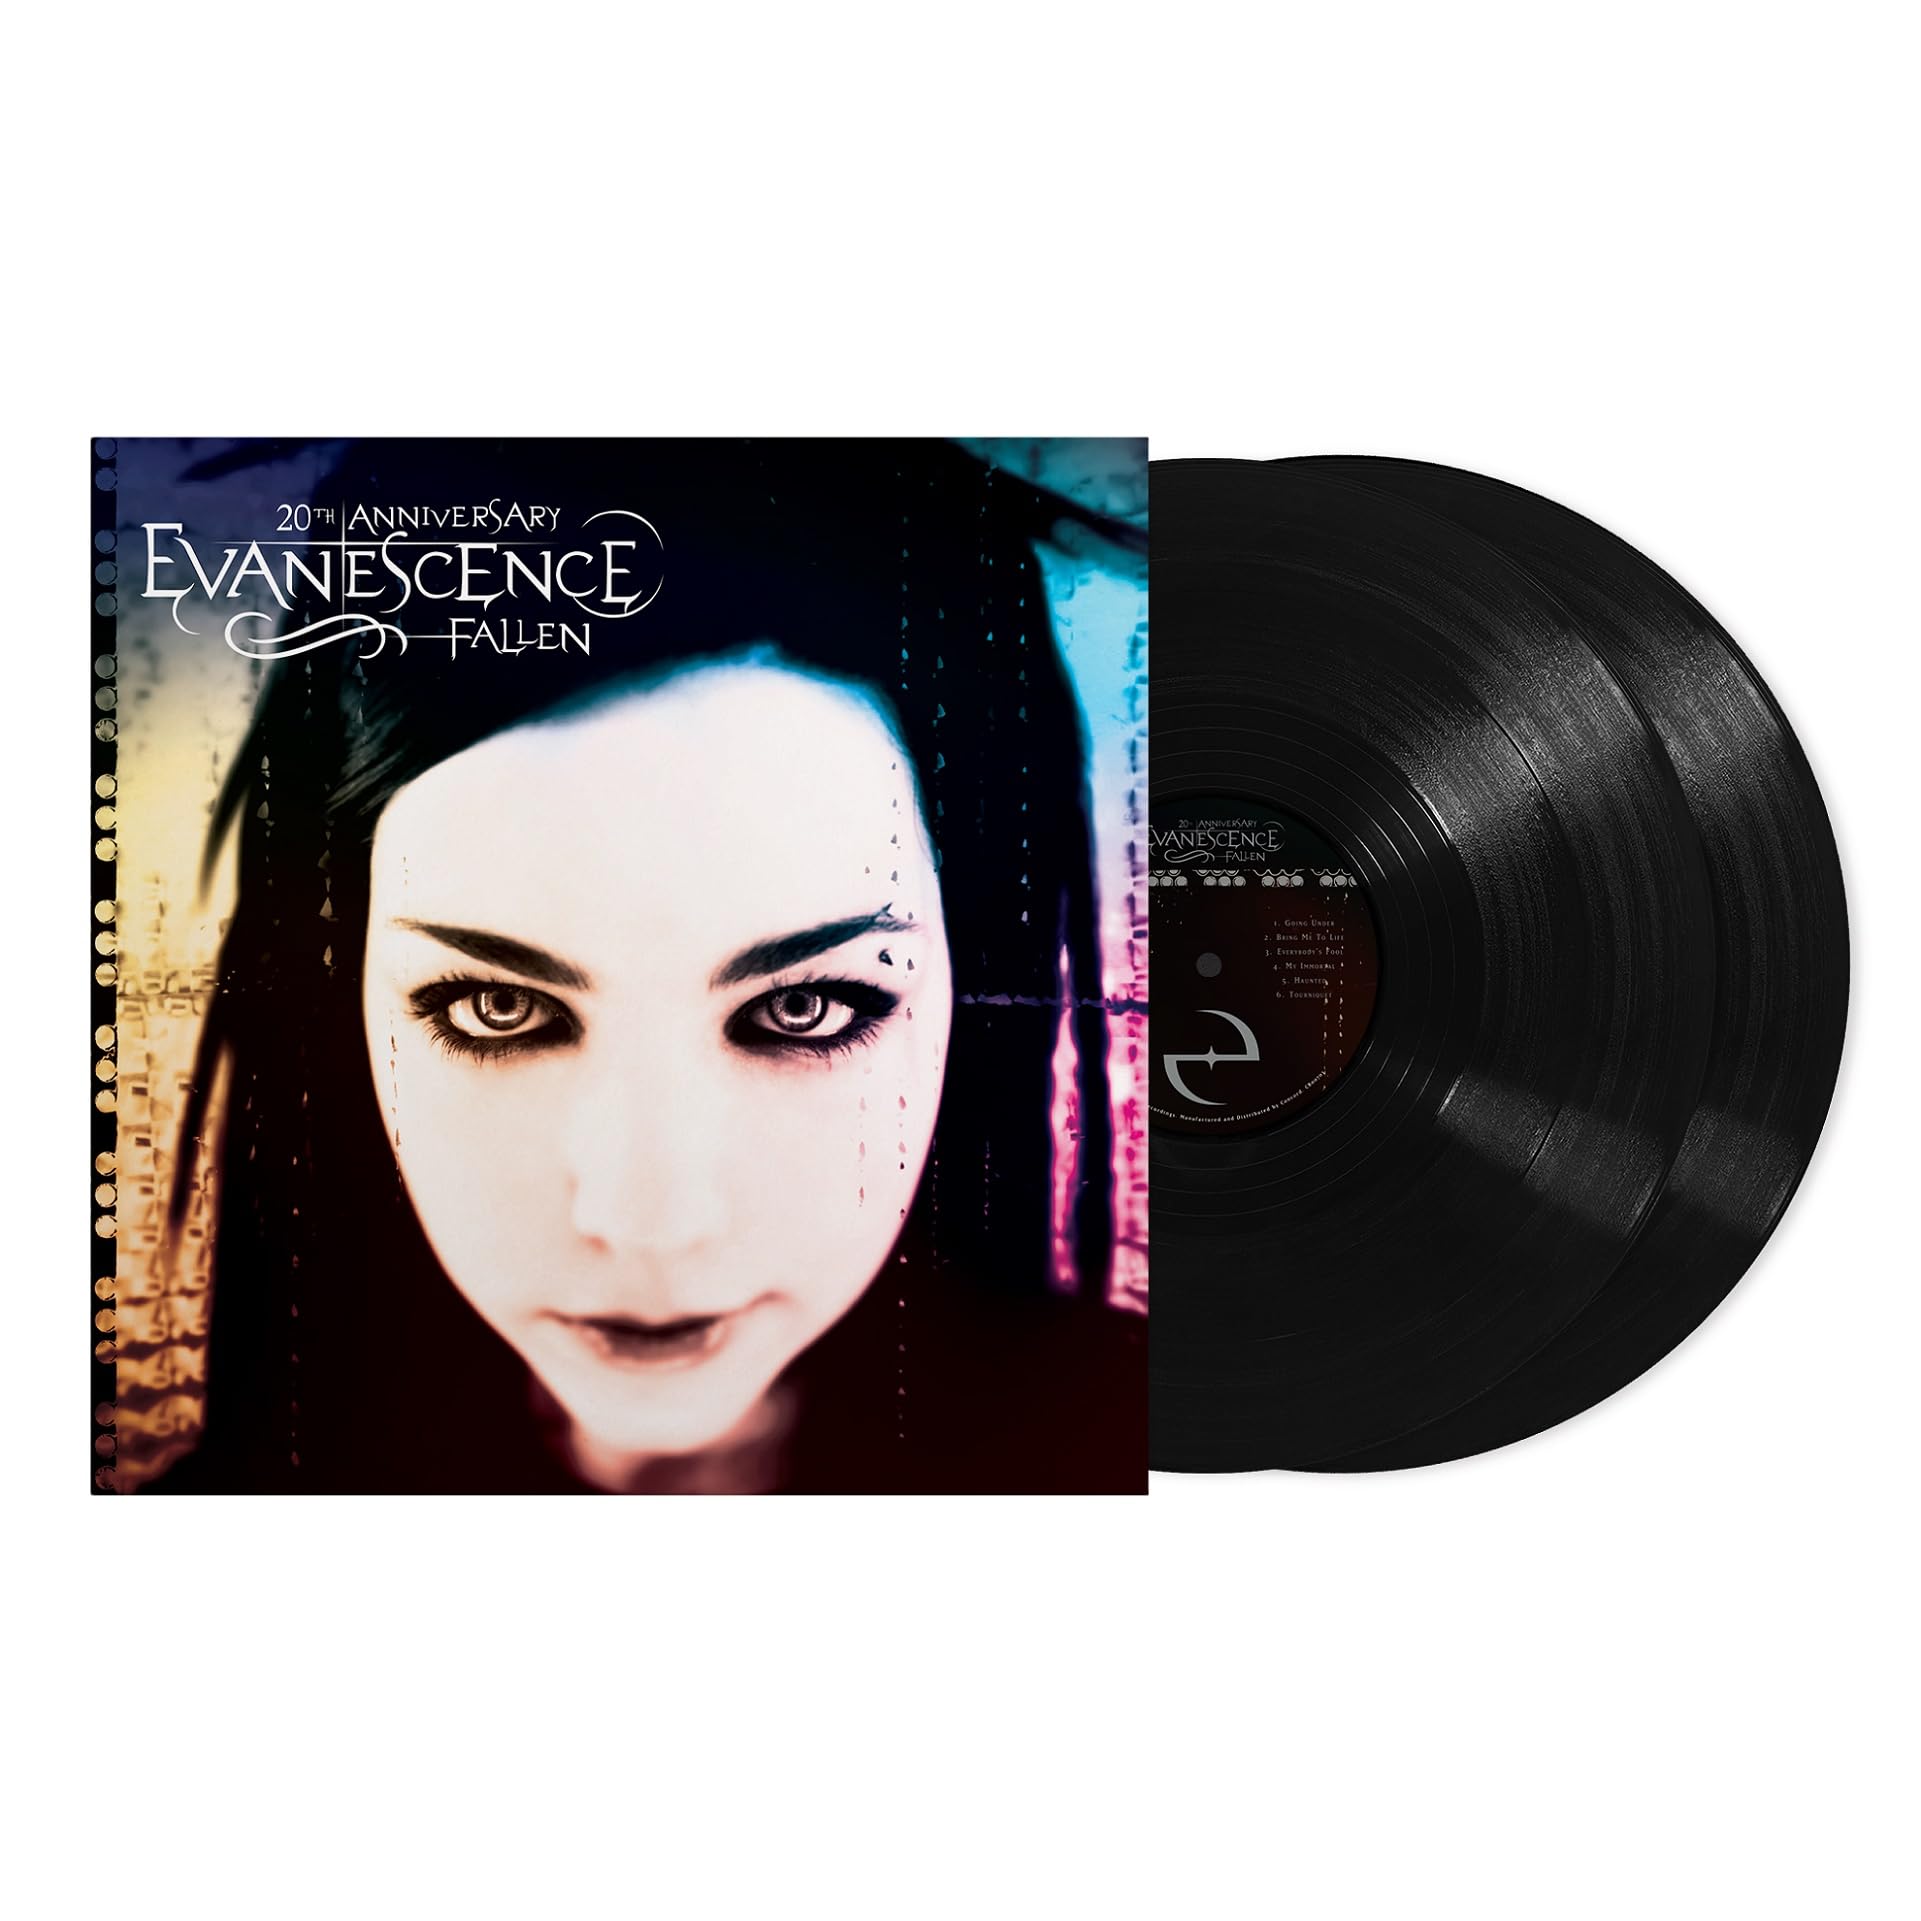 Fallen (20th Anniversary) [Deluxe Edition 2 LP] on MovieShack